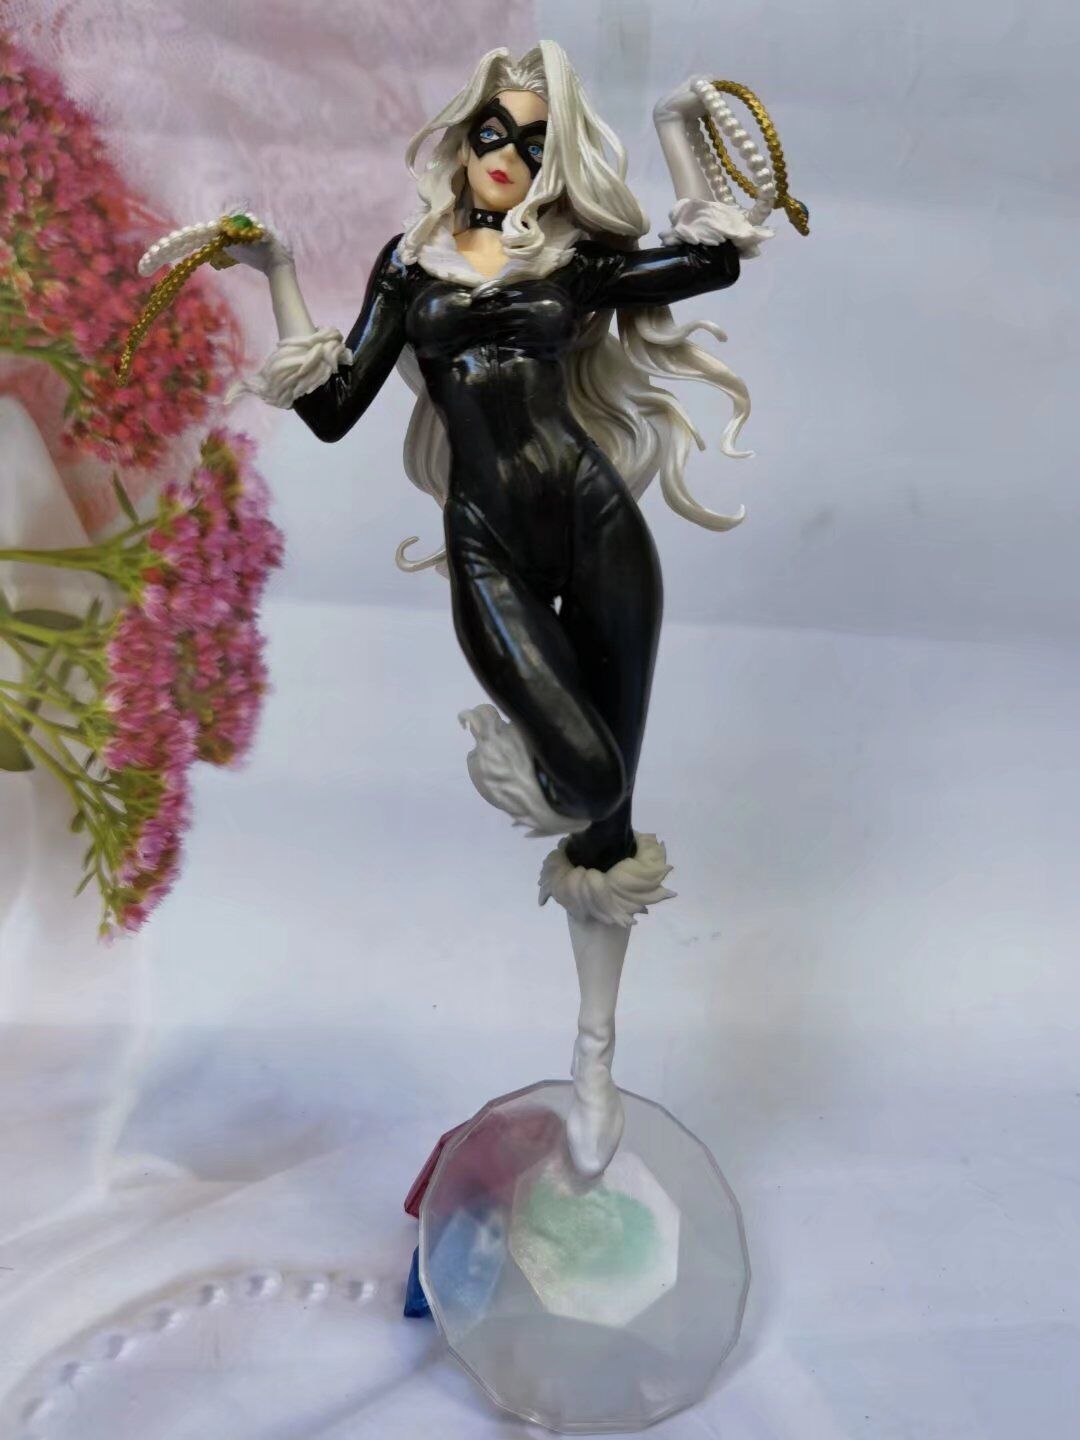 Marvel BISHOUJO STATUE Wonder Woman Black Cat Figurines Model Boxed Collectibles